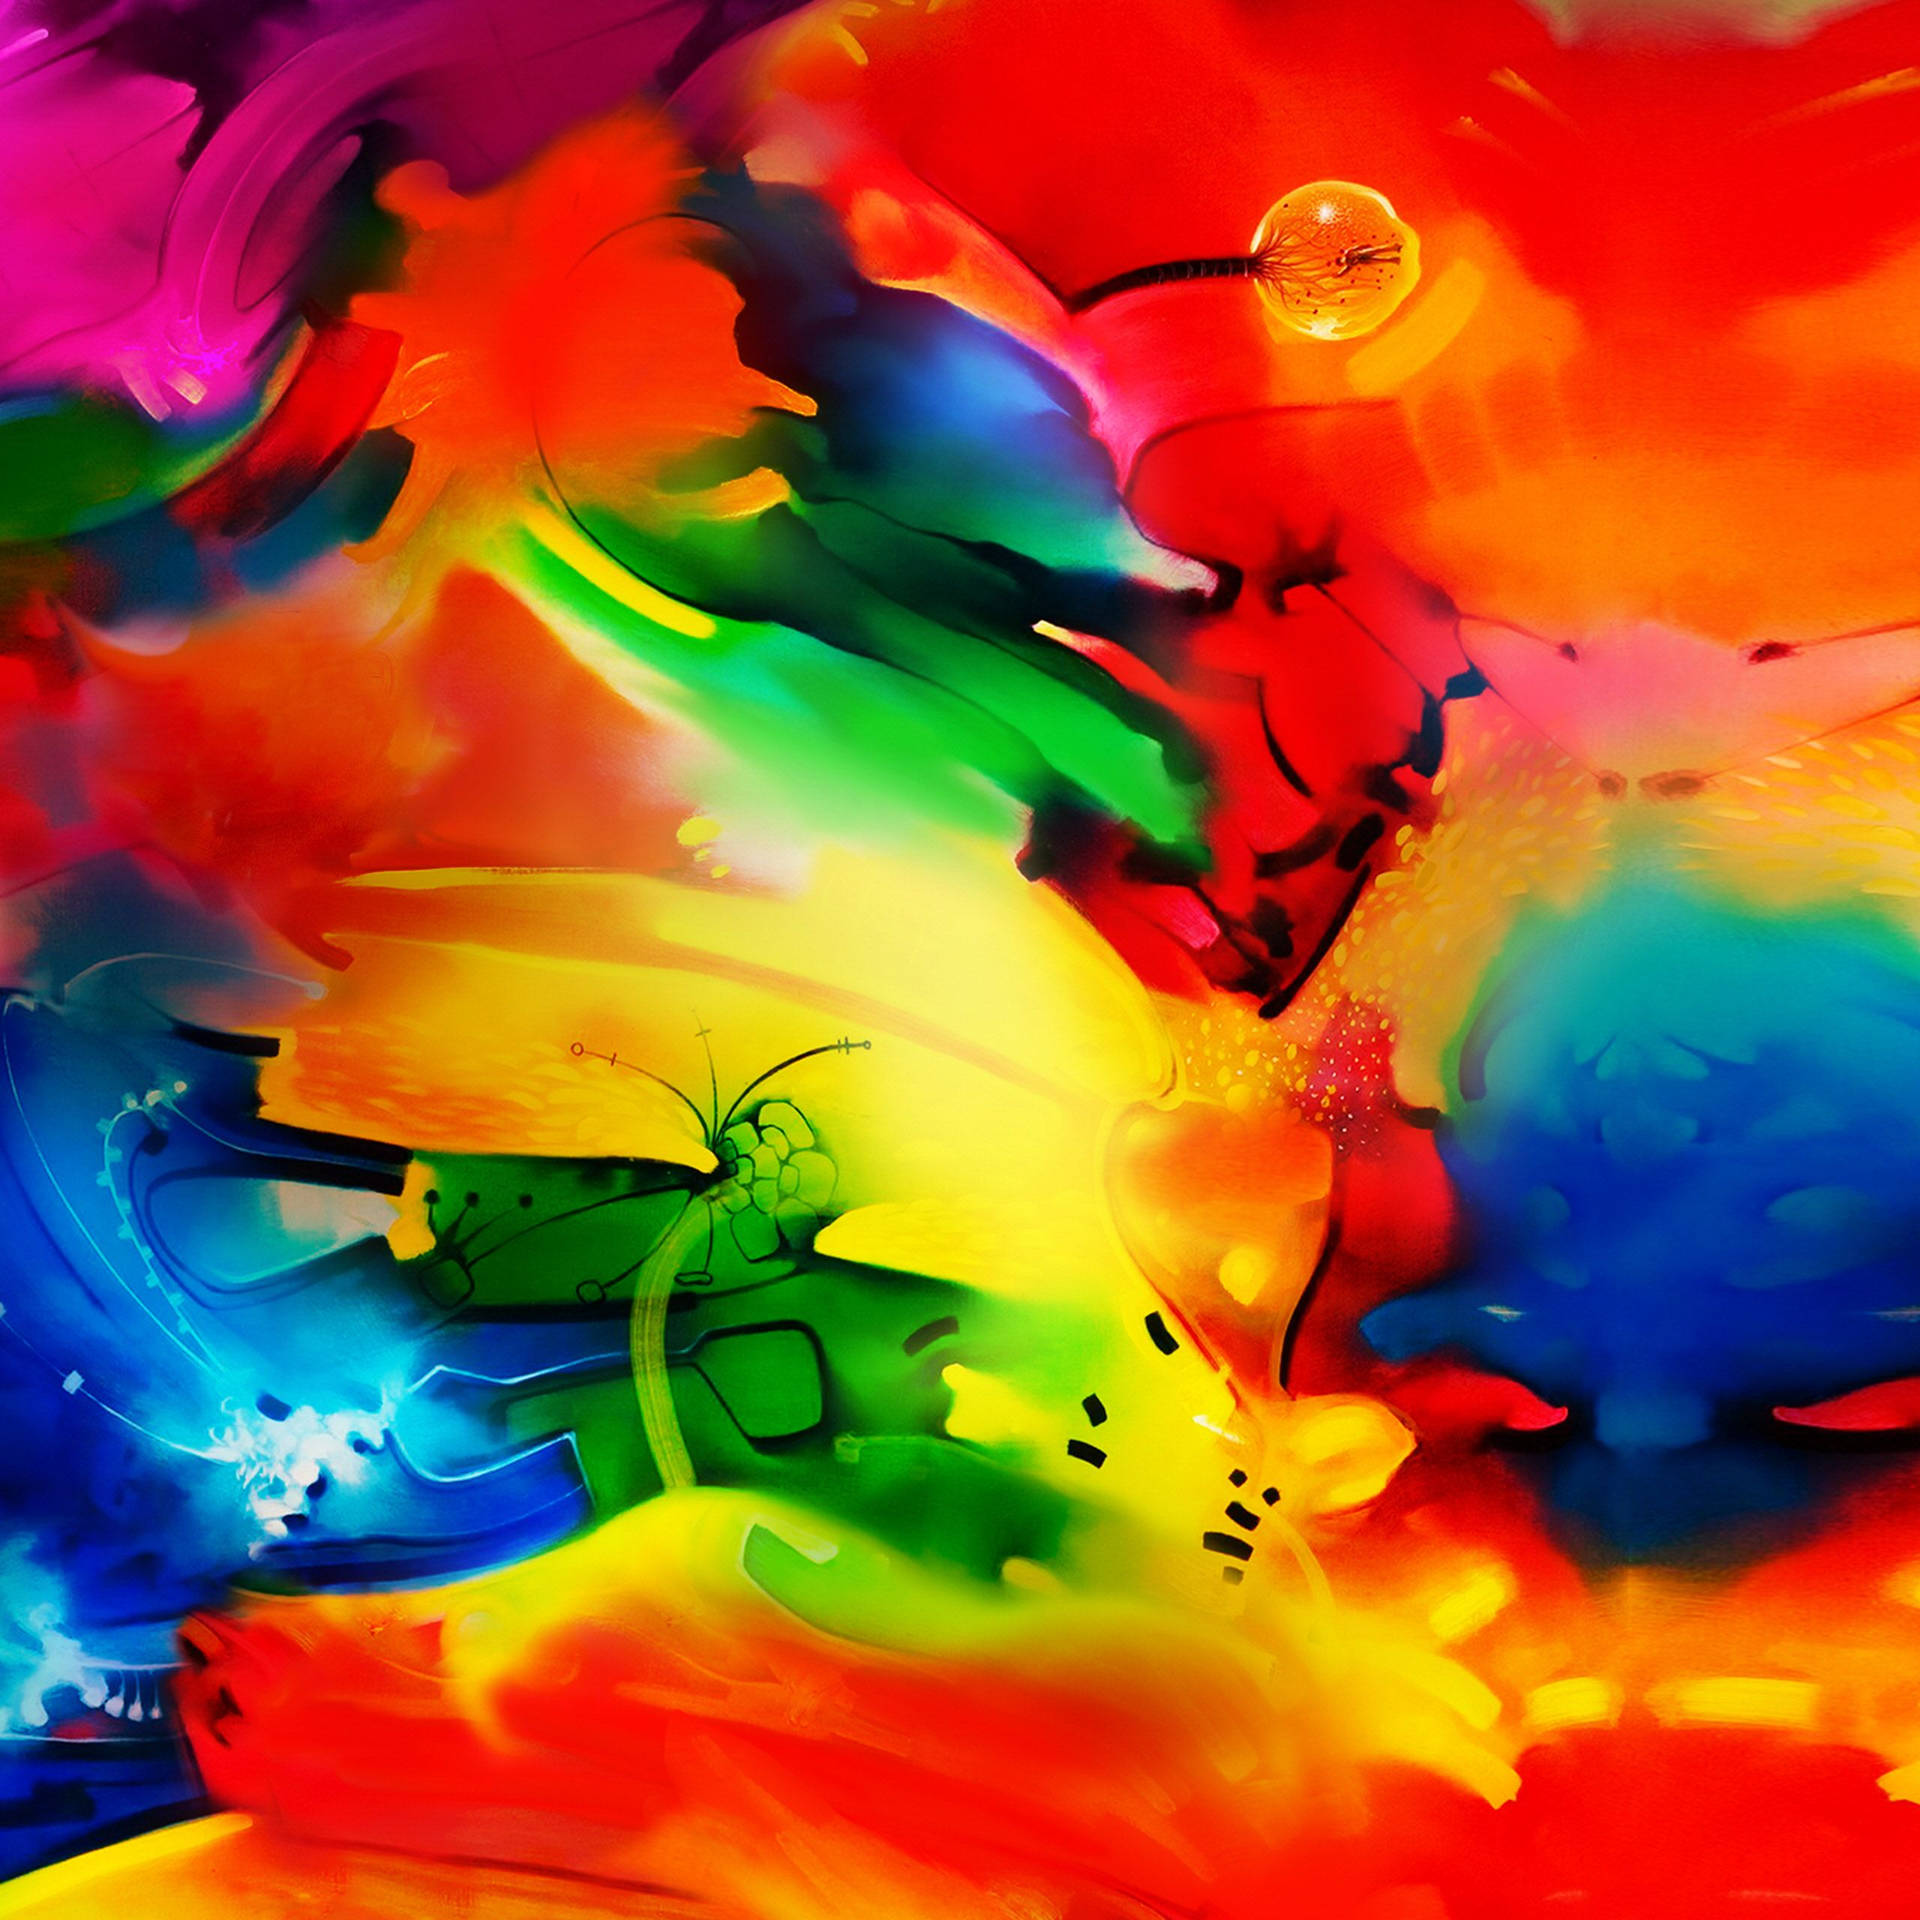 Colourful Abstract Painting Samsung Galaxy Tablet Background